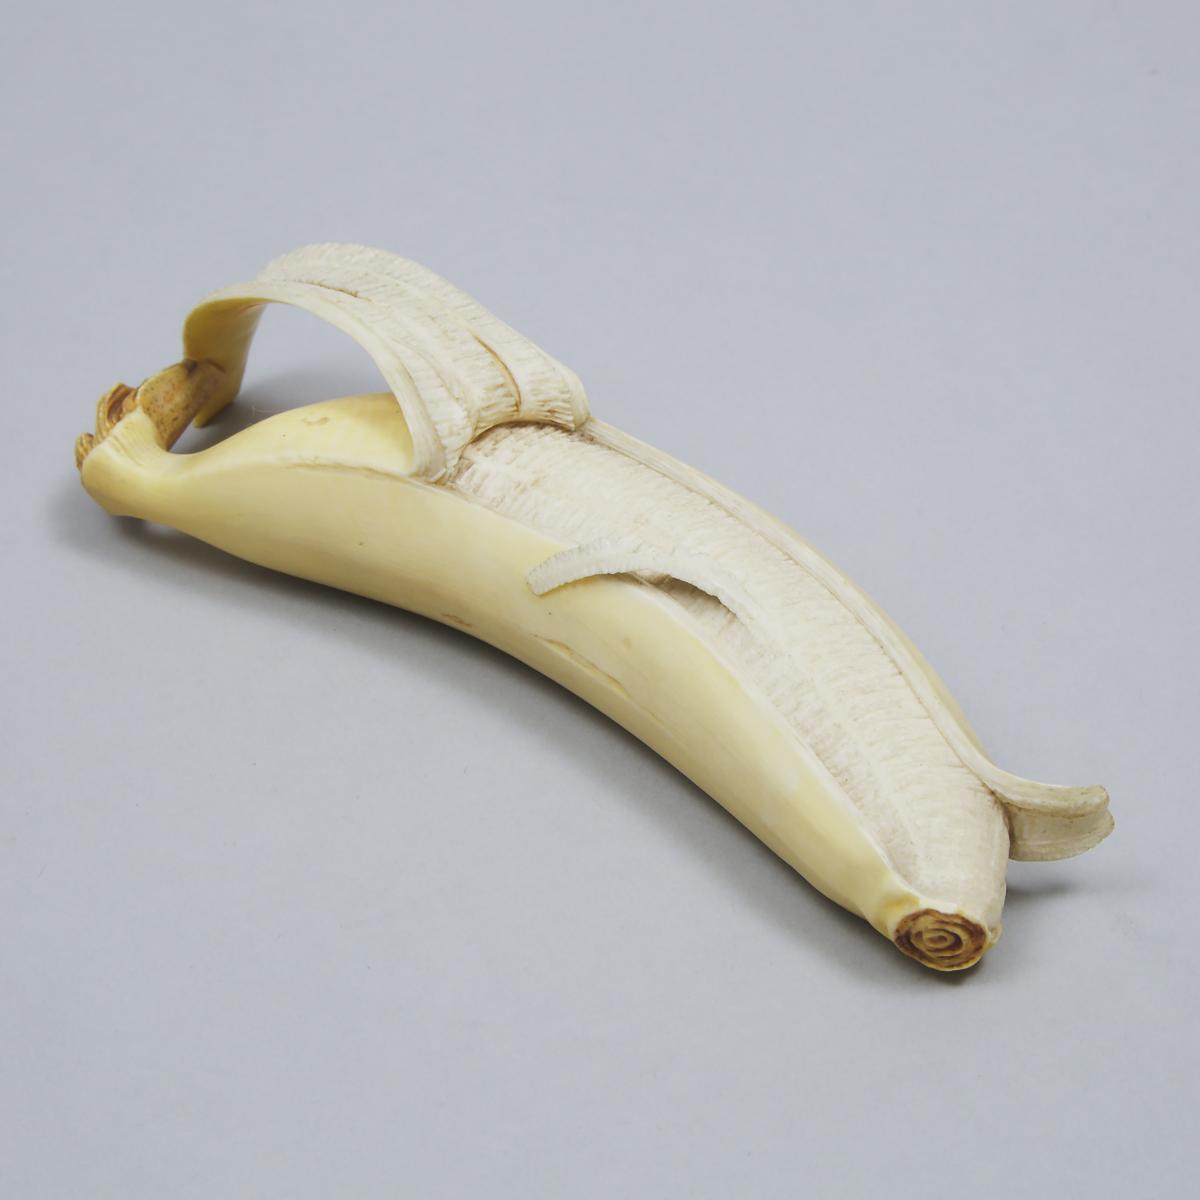 Japanese Carved and Stained Ivory Okimono Banana, Meiji Period, 19th/20th century, length 6.5 in — 1 - Image 2 of 3